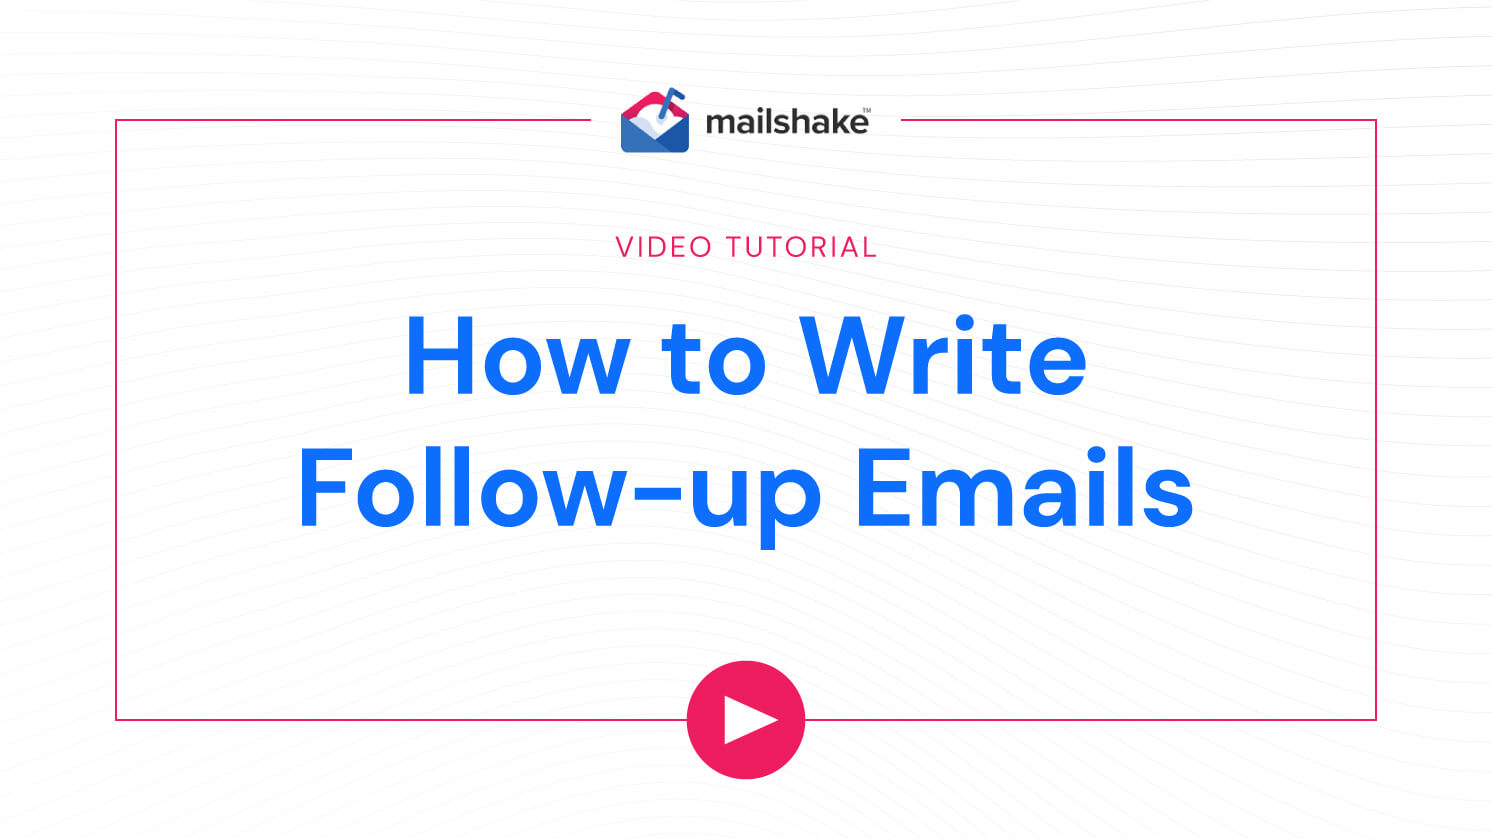 Follow-up email video